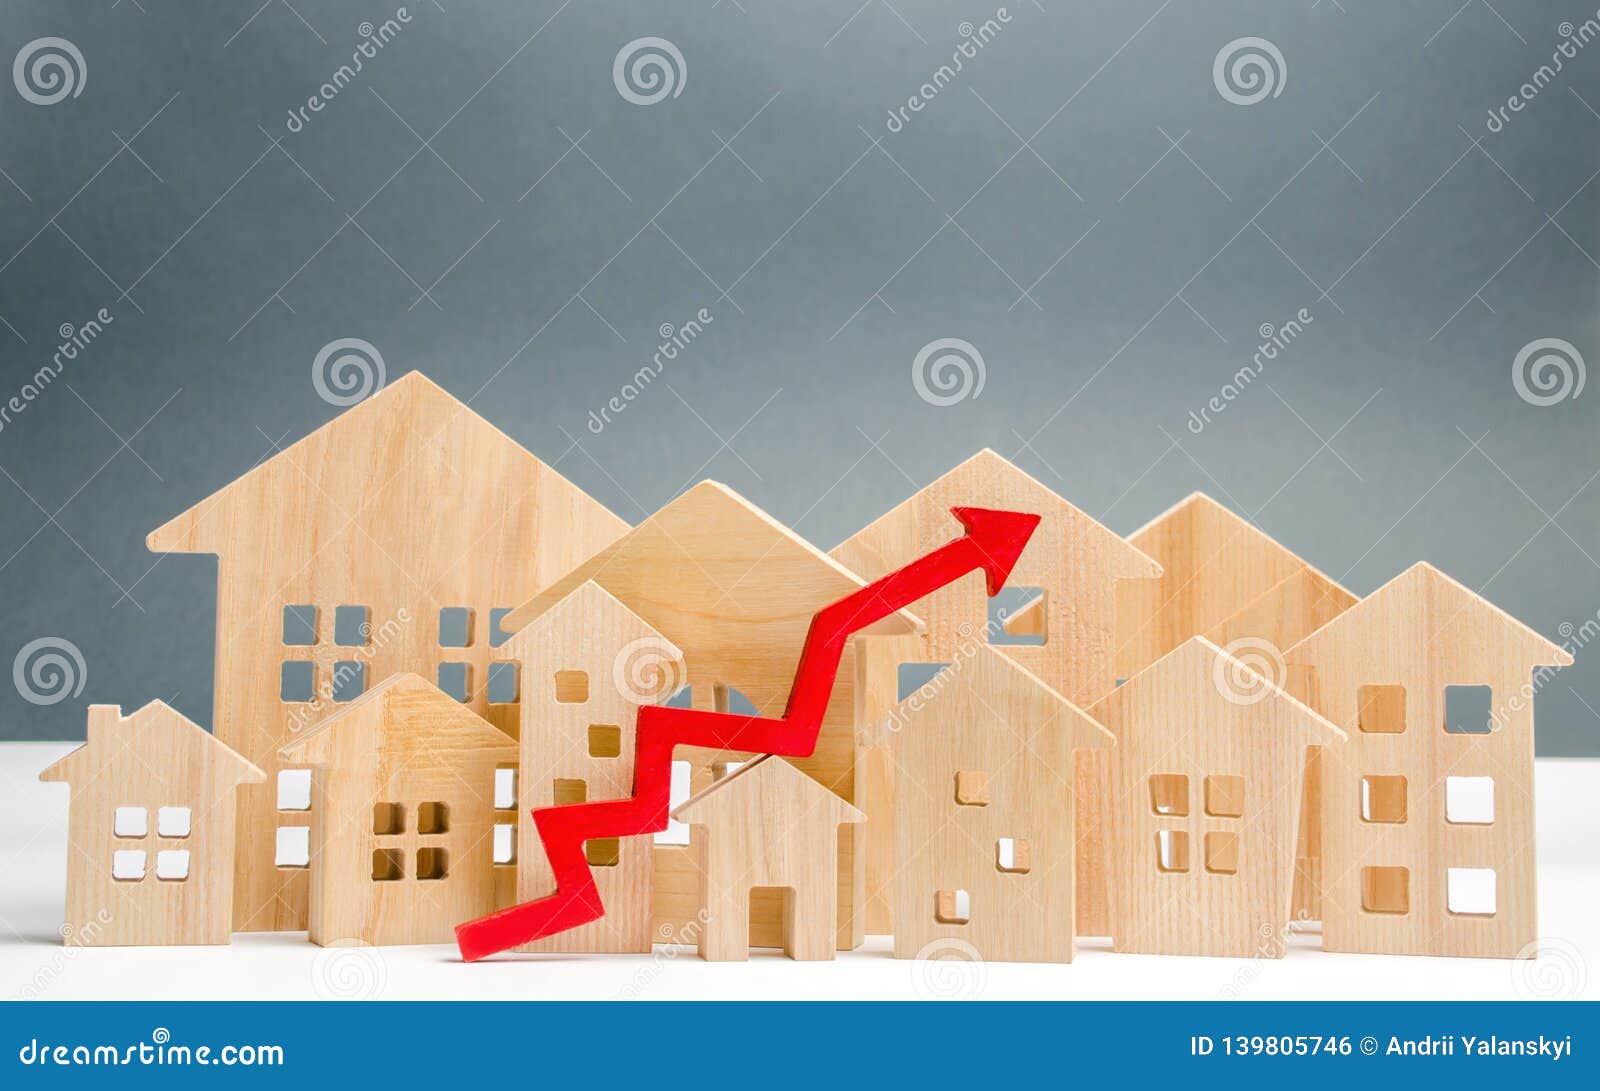 wooden houses and up arrow. the concept of real estate market growth. the increased in housing prices. rise price for utilities /